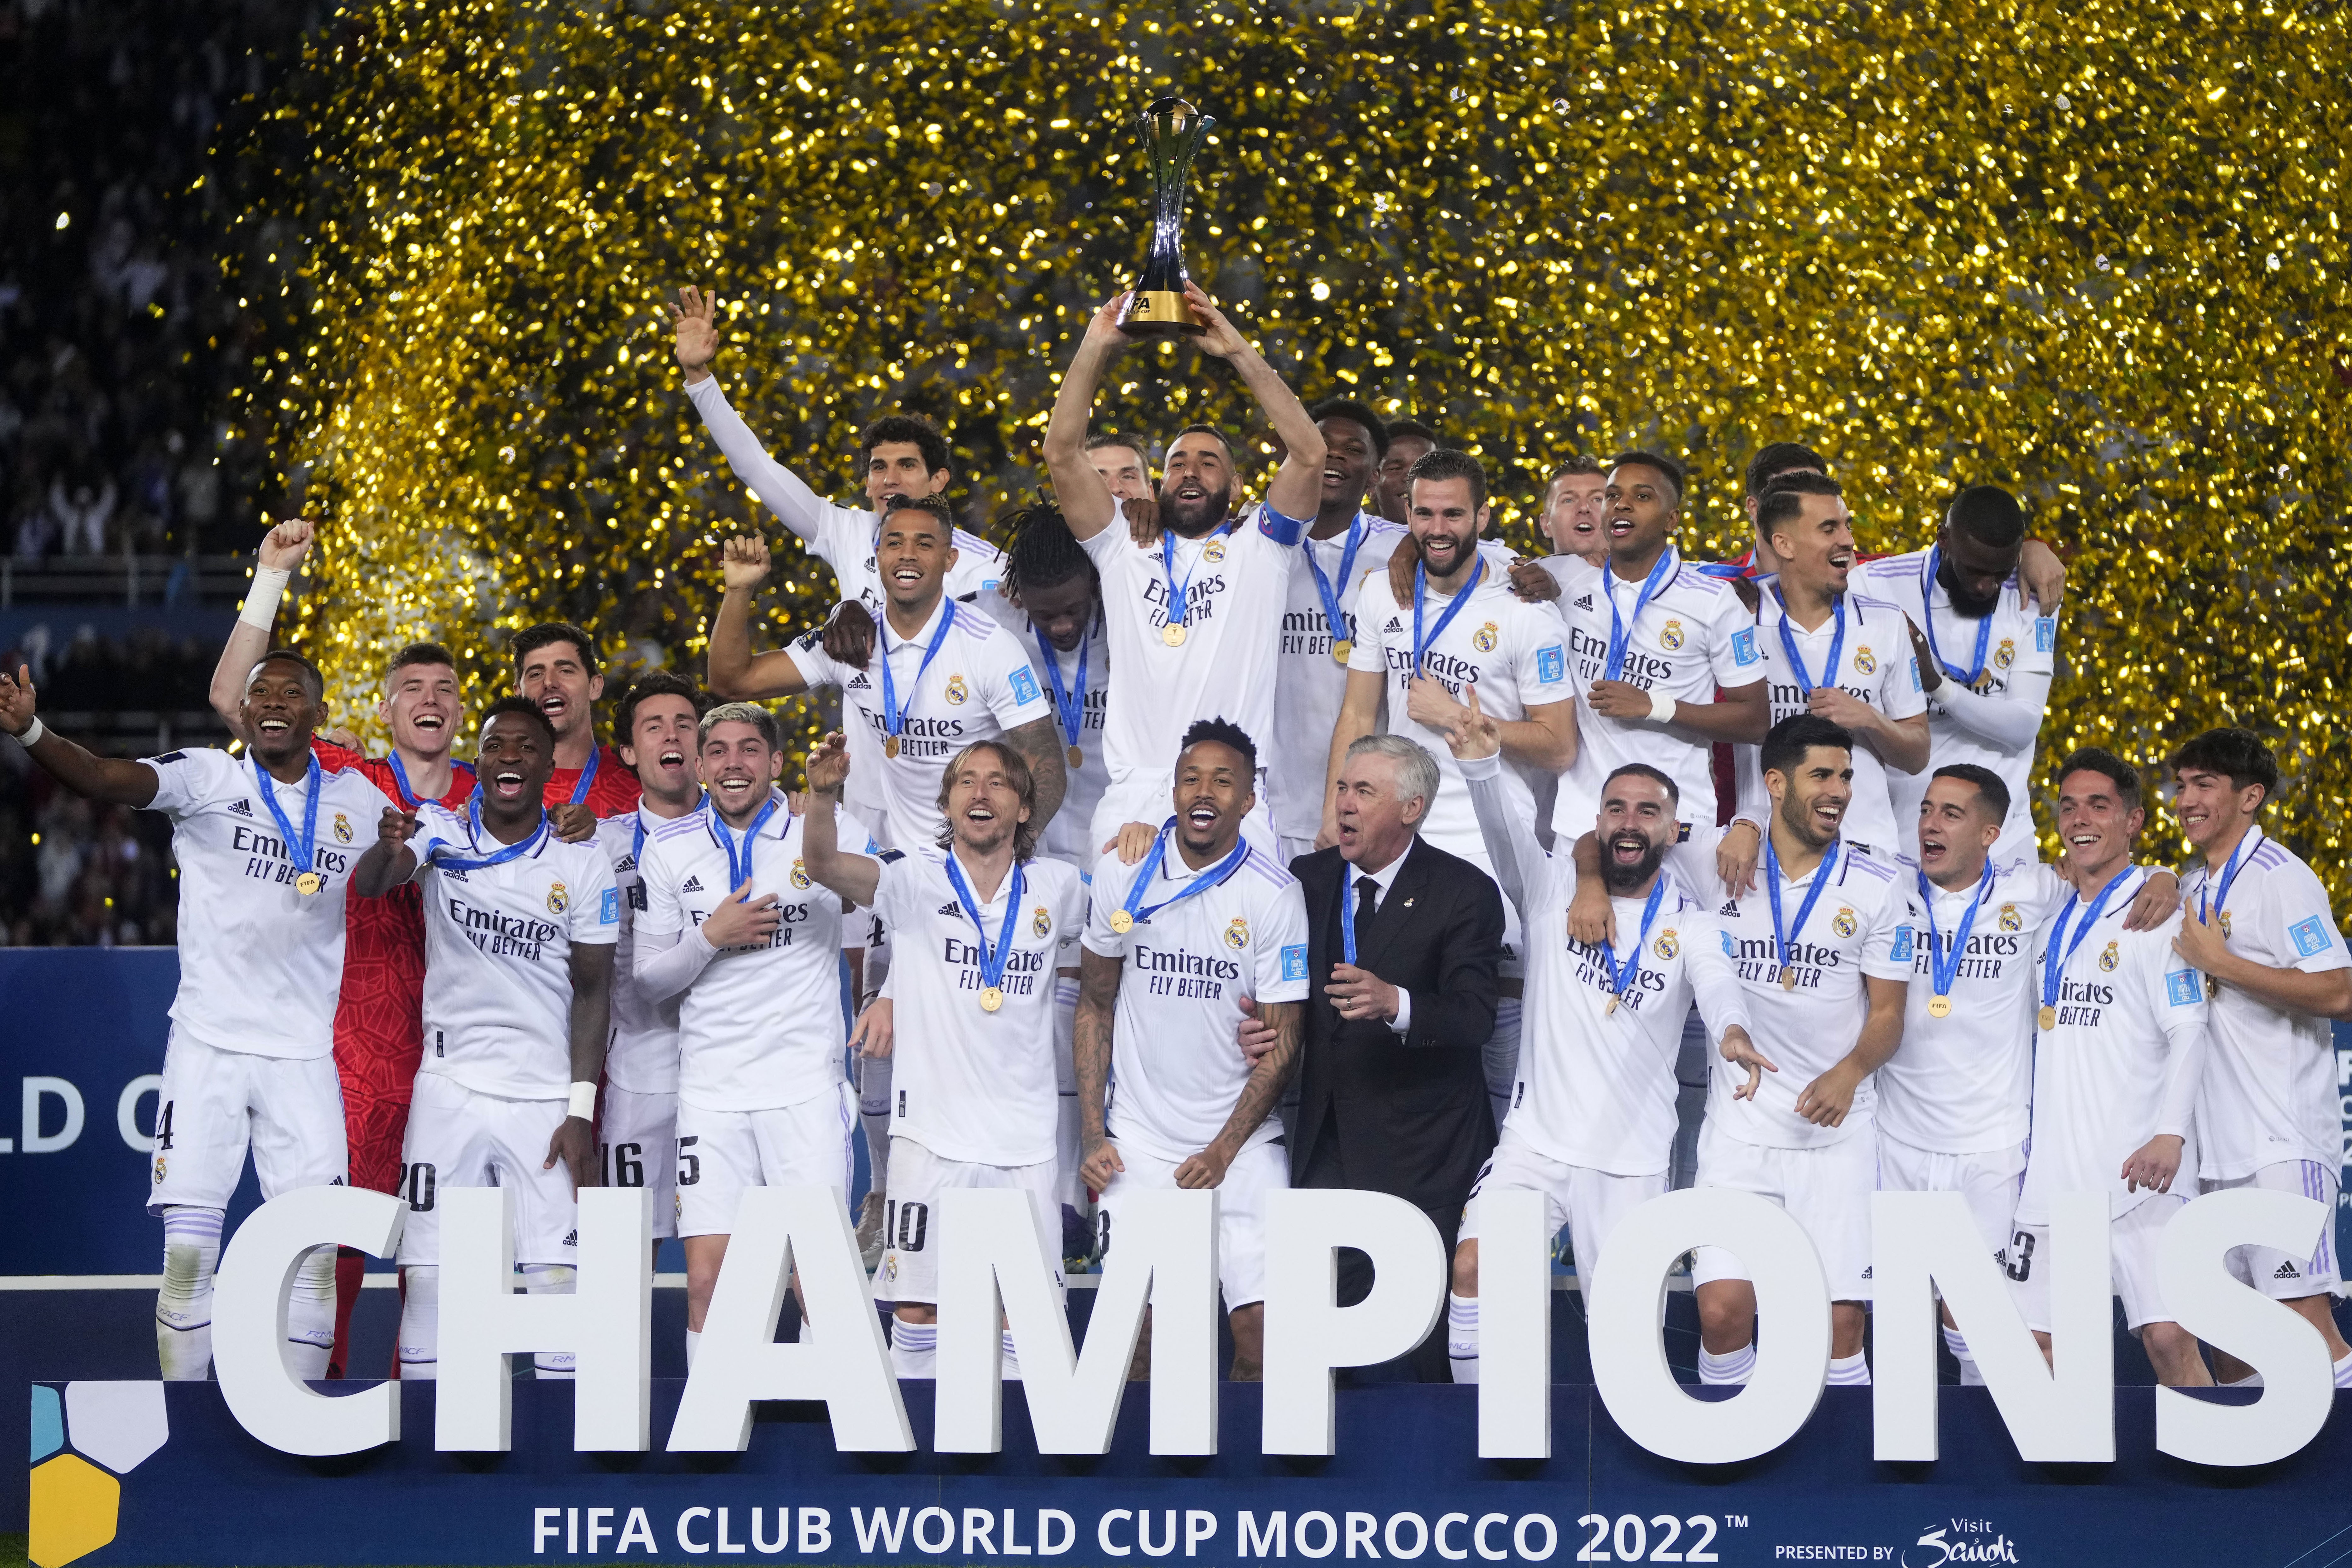 FIFA Men's World Cup History - Past World Cup Winners, Hosts, Most